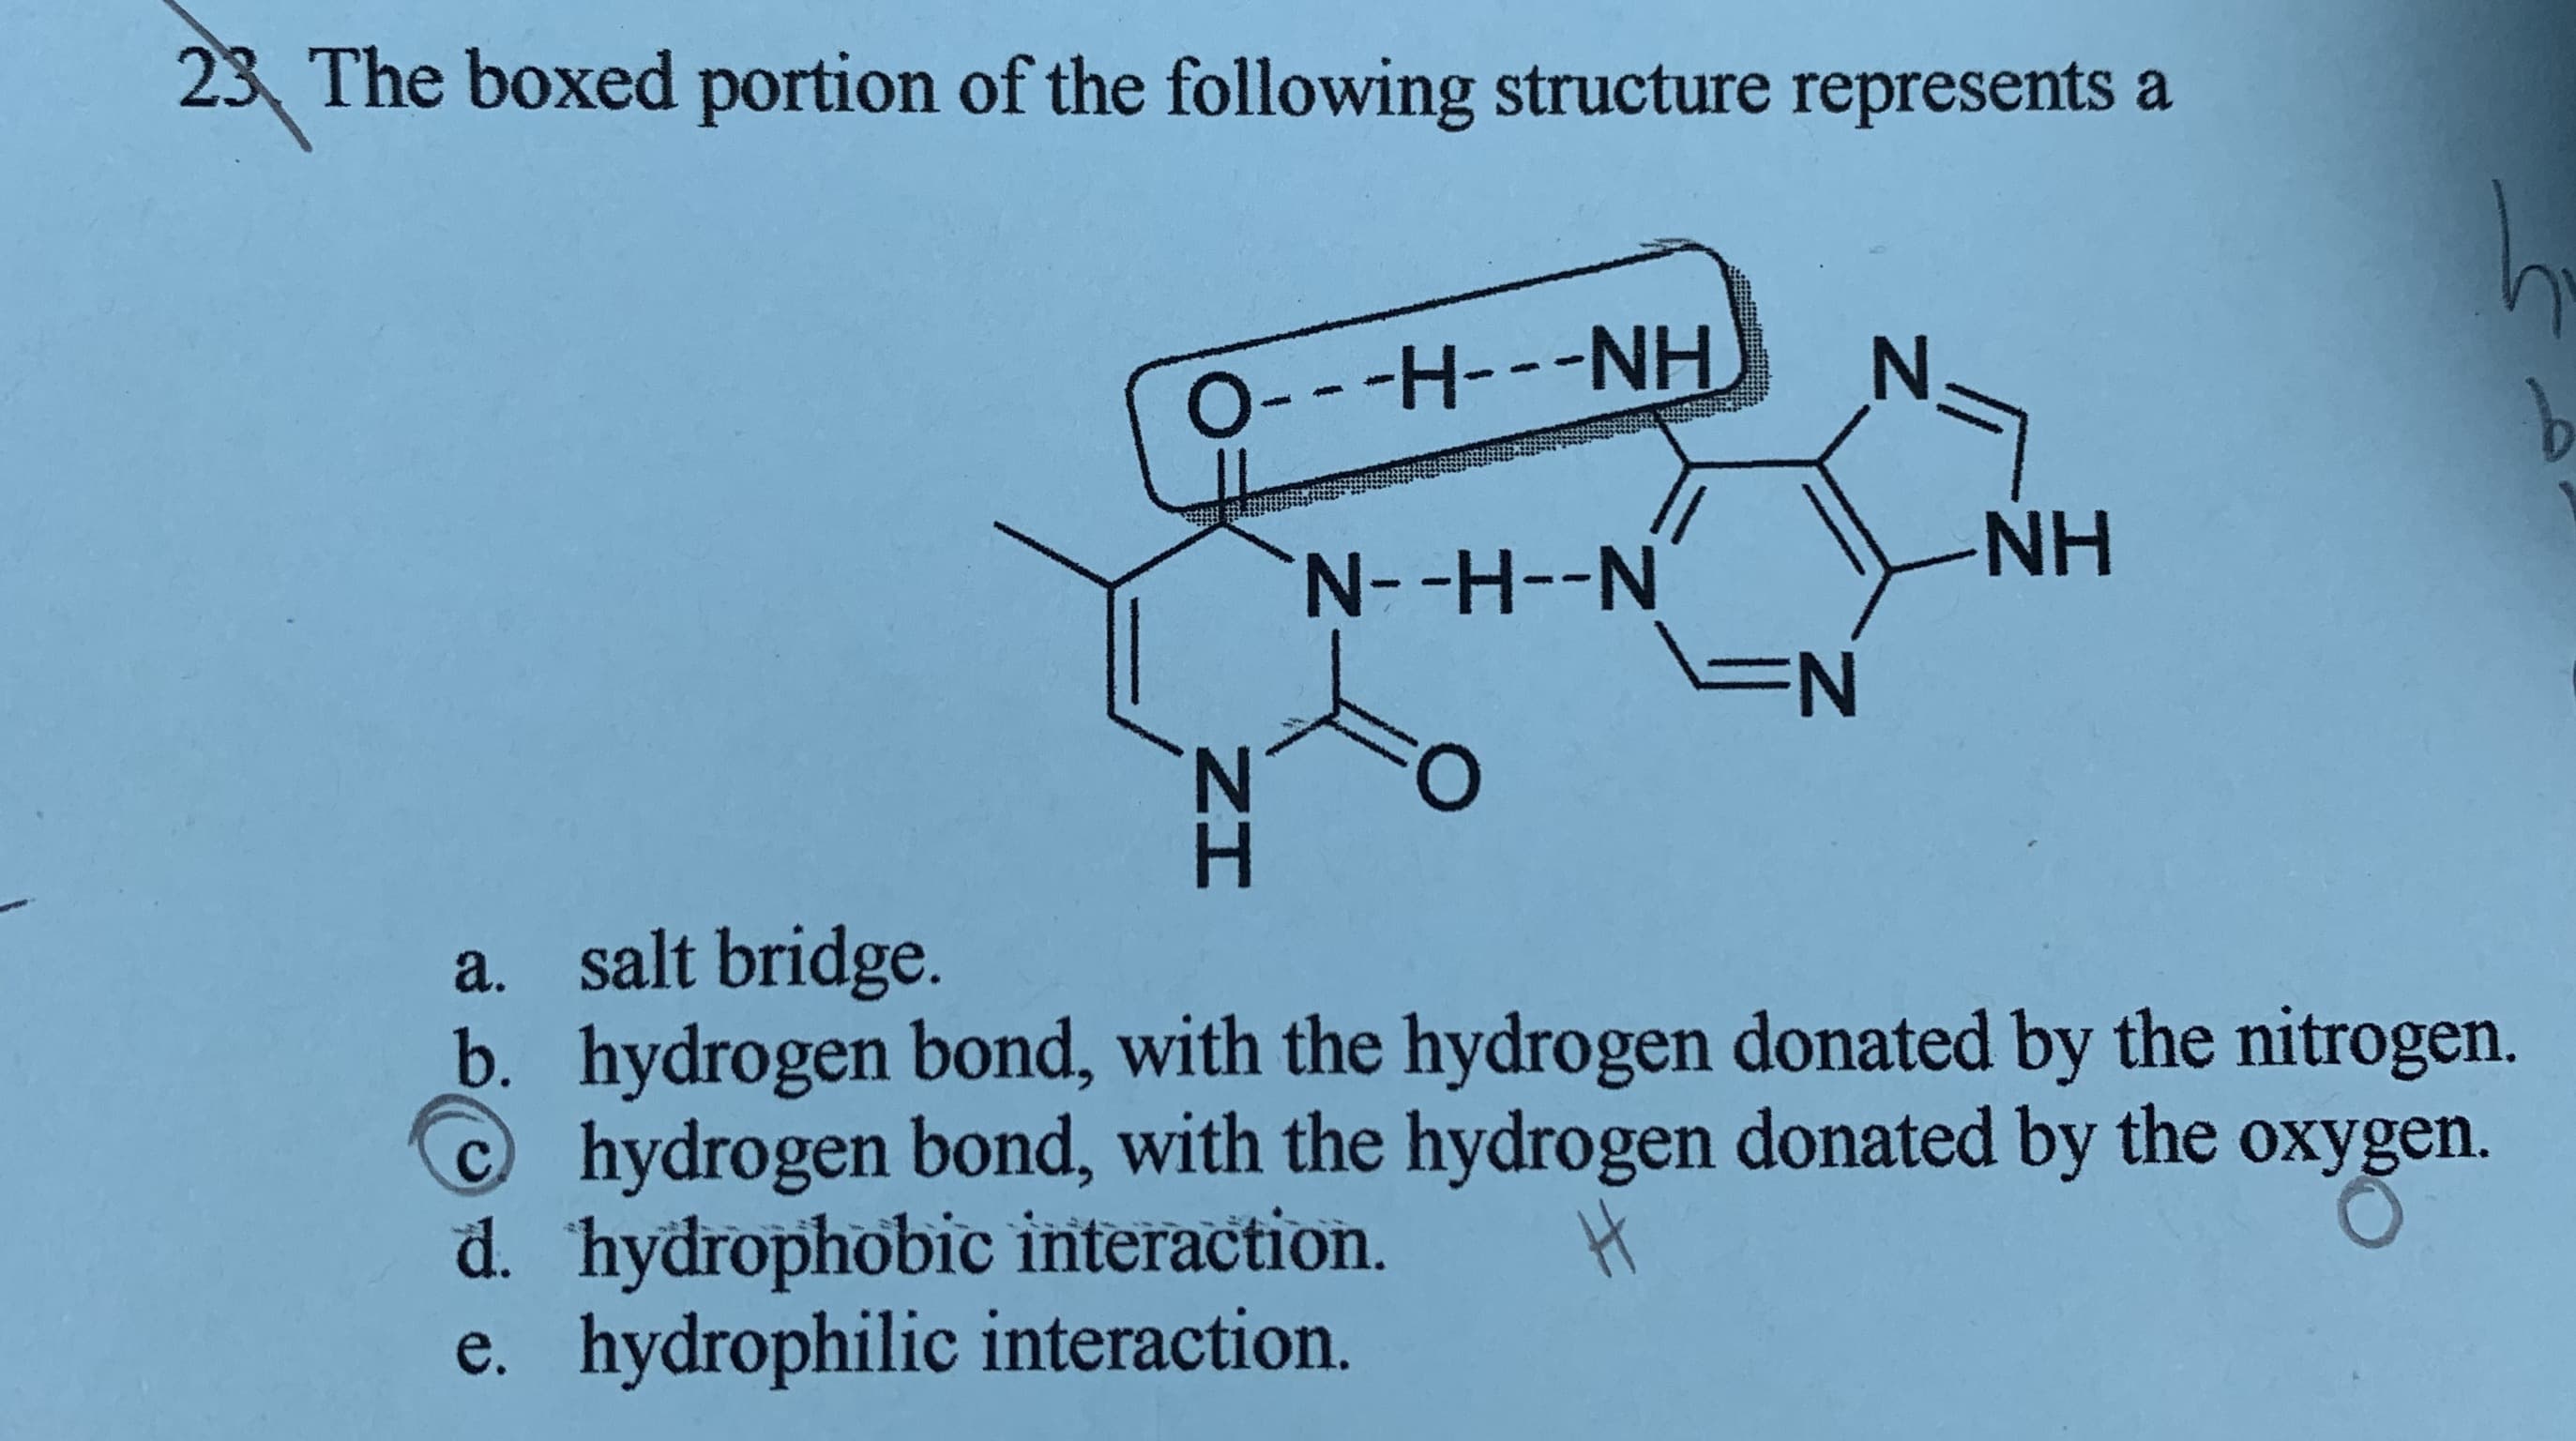 23 The boxed portion of the following structure represents a
O---H---NH
NH
N-H--N
N.
H.
a. salt bridge.
b. hydrogen bond, with the hydrogen donated by the nitrogen.
C hydrogen bond, with the hydrogen donated by the oxygen.
d. hydrophobic interaction.
e. hydrophilic interaction.
